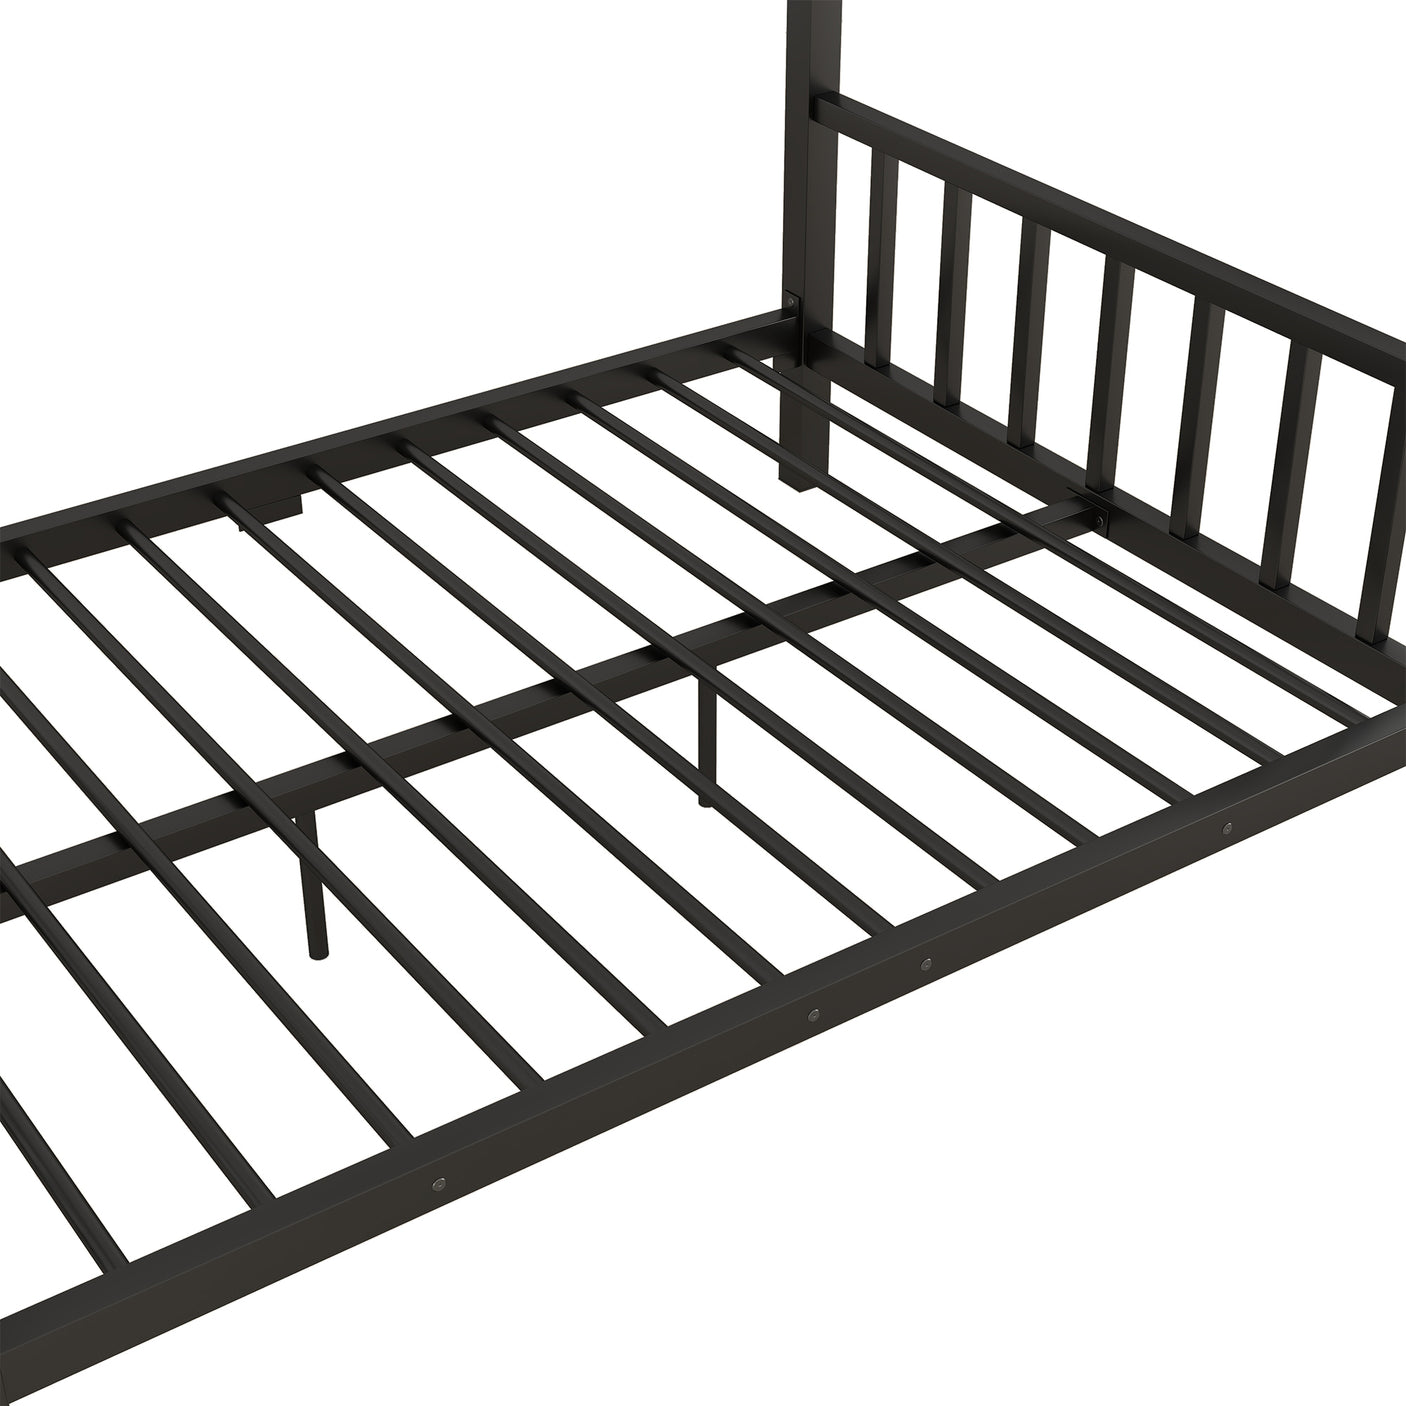 Full Size Metal House Platform Bed with Two Drawers,Headboard and Footboard,Roof Design,Black - Home Elegance USA